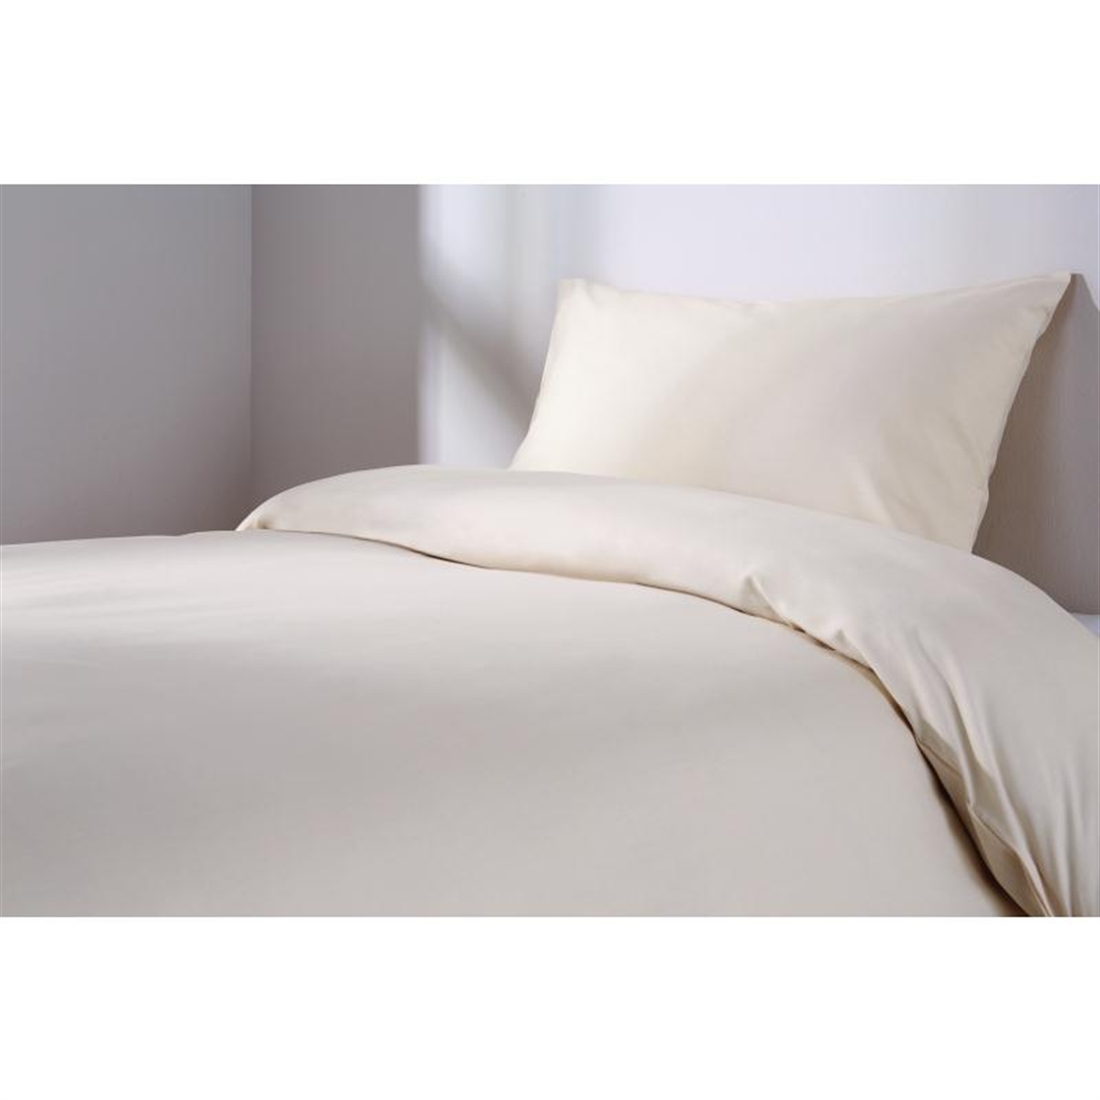 Mitre Essentials Spectrum Fitted Sheet Ivory Metric Single